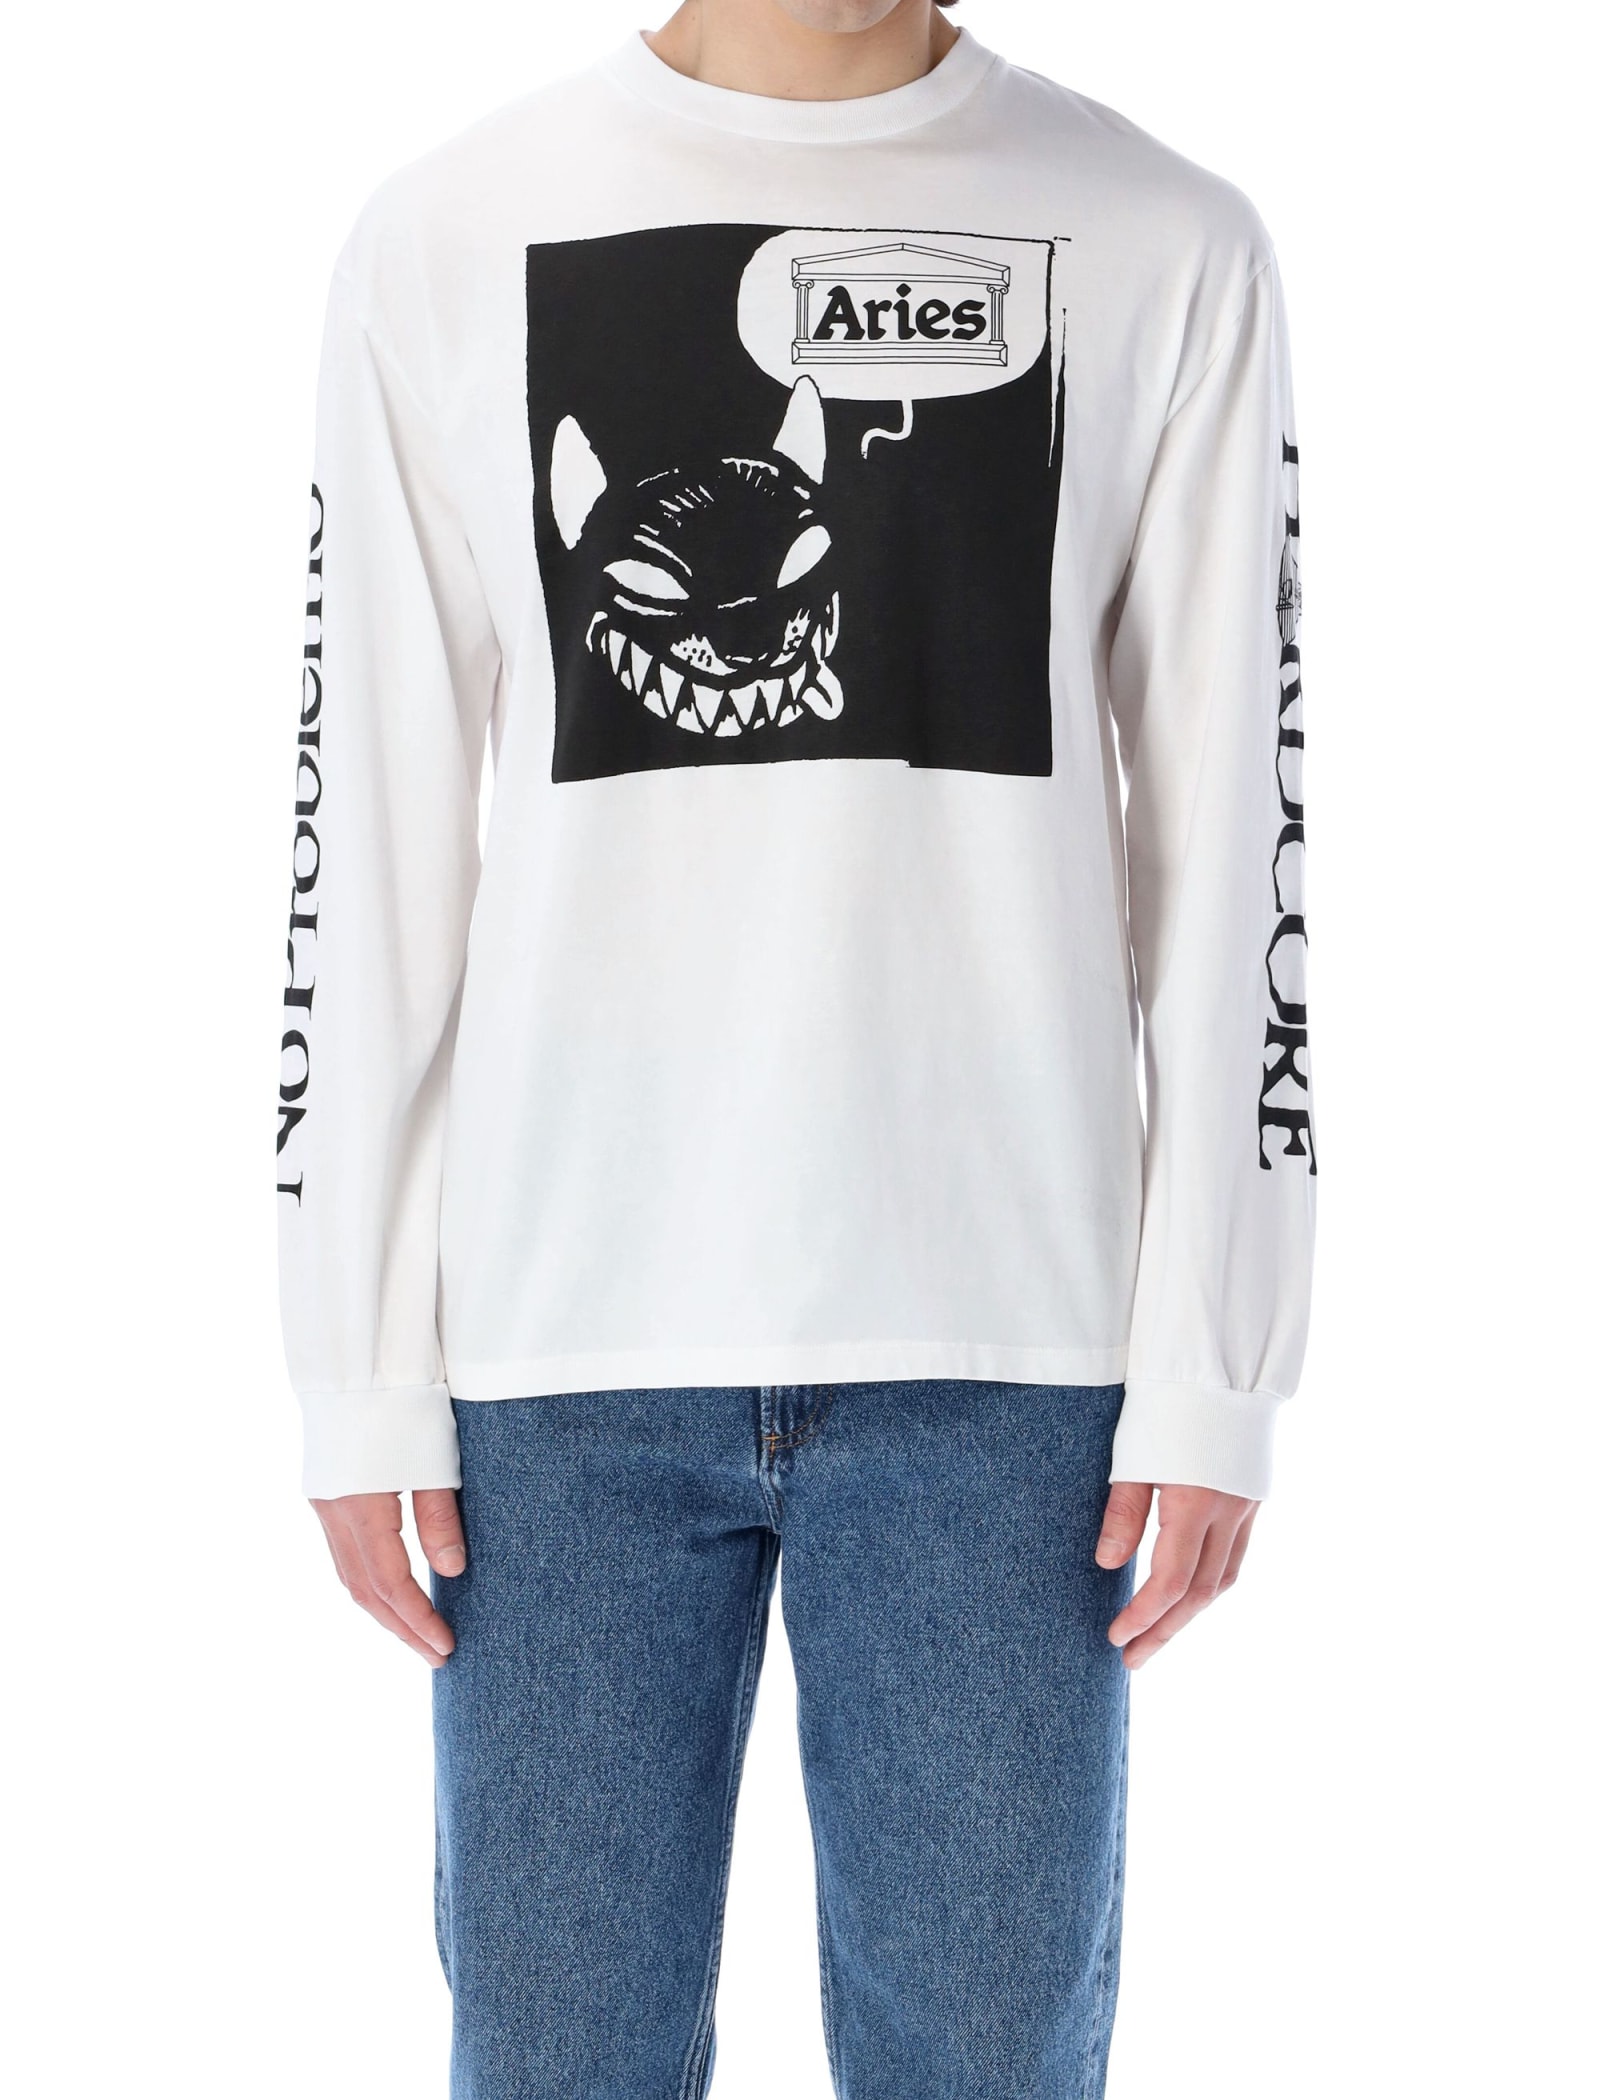 In Prink Things About Aries Tee Shirt Long Sleeve Shirt 